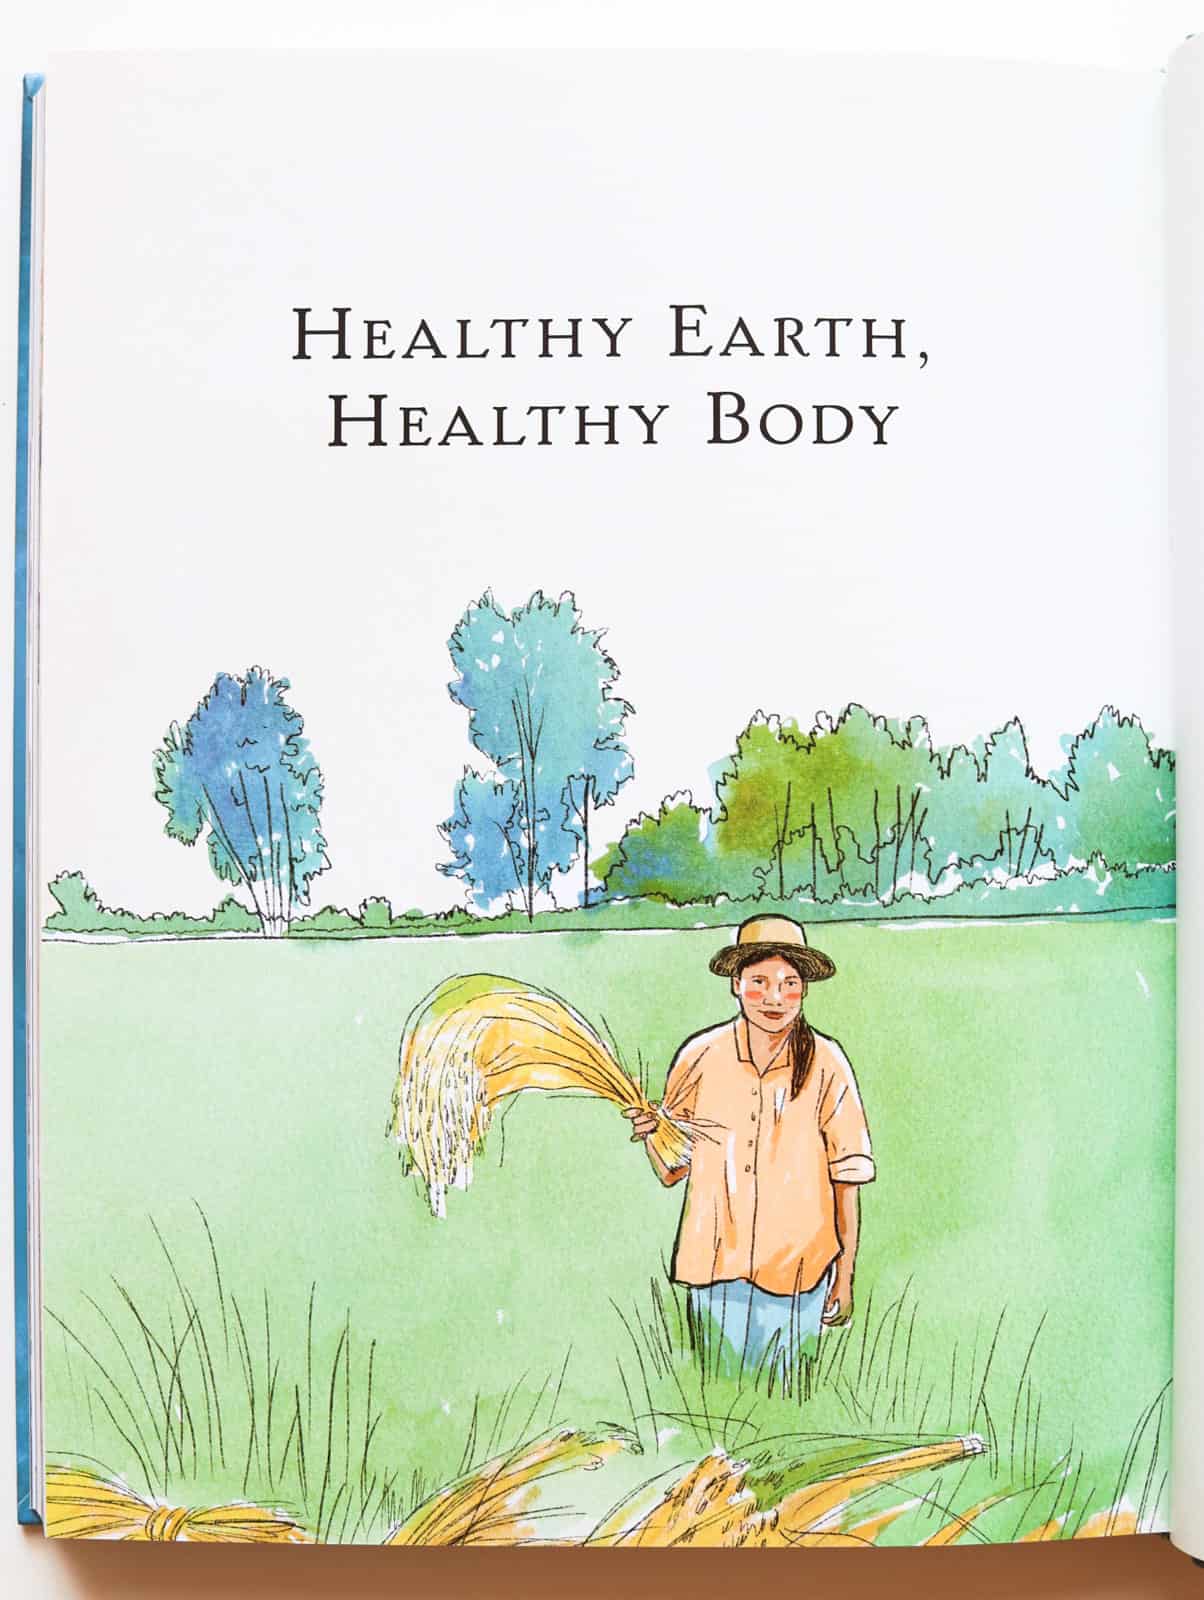 illustration from The Simple Art of Rice cookbook with text: Healthy Earth, Healthy Body